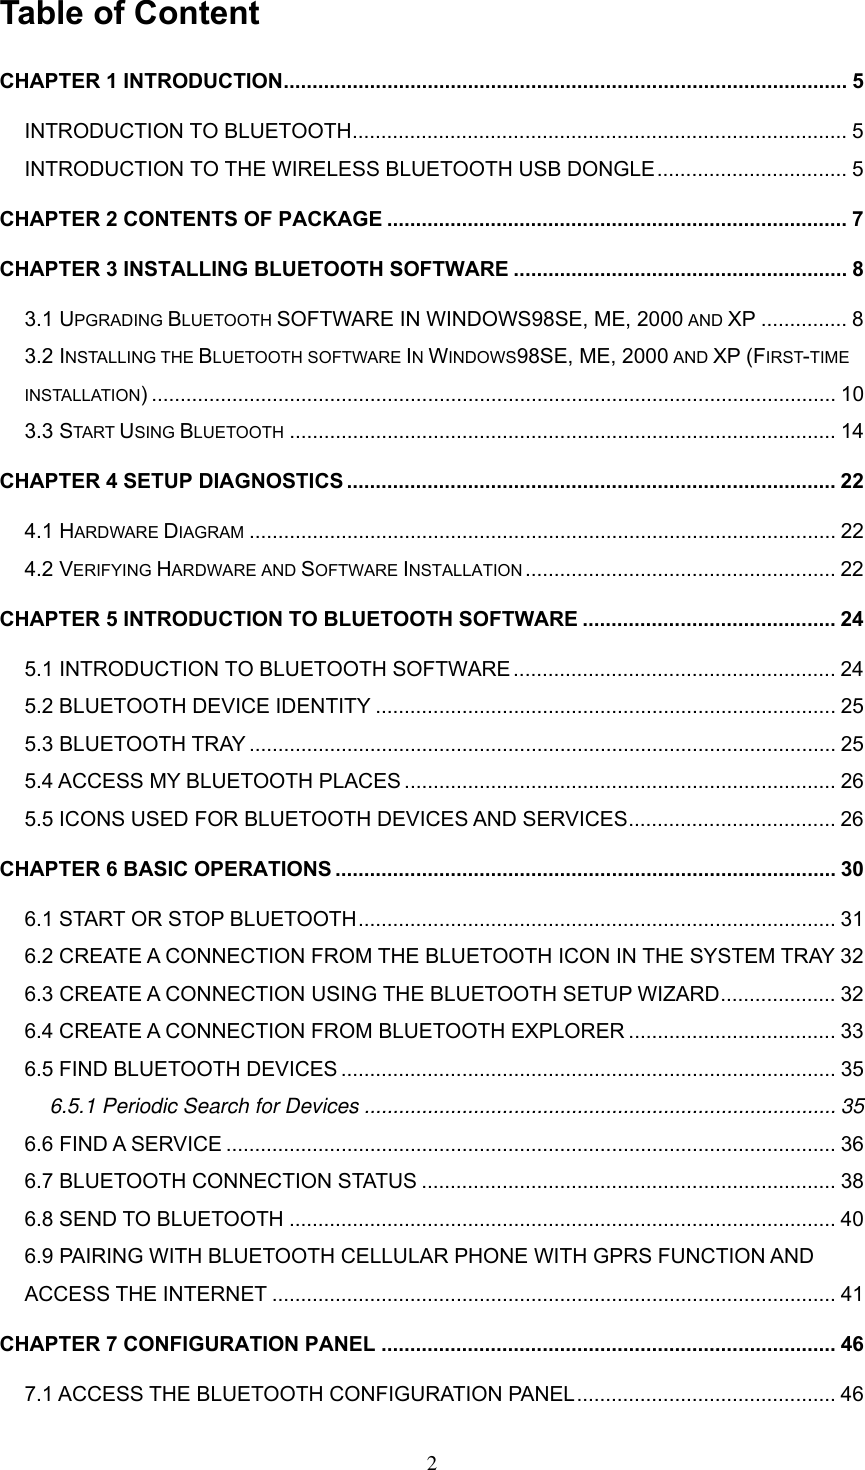 Table of Content CHAPTER 1 INTRODUCTION.................................................................................................. 5 INTRODUCTION TO BLUETOOTH...................................................................................... 5 INTRODUCTION TO THE WIRELESS BLUETOOTH USB DONGLE................................. 5 CHAPTER 2 CONTENTS OF PACKAGE ................................................................................ 7 CHAPTER 3 INSTALLING BLUETOOTH SOFTWARE .......................................................... 8 3.1 UPGRADING BLUETOOTH SOFTWARE IN WINDOWS98SE, ME, 2000 AND XP ............... 8 3.2 INSTALLING THE BLUETOOTH SOFTWARE IN WINDOWS98SE, ME, 2000 AND XP (FIRST-TIME INSTALLATION) ....................................................................................................................... 10 3.3 START USING BLUETOOTH ............................................................................................... 14 CHAPTER 4 SETUP DIAGNOSTICS ..................................................................................... 22 4.1 HARDWARE DIAGRAM ...................................................................................................... 22 4.2 VERIFYING HARDWARE AND SOFTWARE INSTALLATION ...................................................... 22 CHAPTER 5 INTRODUCTION TO BLUETOOTH SOFTWARE ............................................ 24 5.1 INTRODUCTION TO BLUETOOTH SOFTWARE ........................................................ 24 5.2 BLUETOOTH DEVICE IDENTITY ................................................................................ 25 5.3 BLUETOOTH TRAY ...................................................................................................... 25 5.4 ACCESS MY BLUETOOTH PLACES ........................................................................... 26 5.5 ICONS USED FOR BLUETOOTH DEVICES AND SERVICES.................................... 26 CHAPTER 6 BASIC OPERATIONS ....................................................................................... 30 6.1 START OR STOP BLUETOOTH................................................................................... 31 6.2 CREATE A CONNECTION FROM THE BLUETOOTH ICON IN THE SYSTEM TRAY 32 6.3 CREATE A CONNECTION USING THE BLUETOOTH SETUP WIZARD.................... 32 6.4 CREATE A CONNECTION FROM BLUETOOTH EXPLORER .................................... 33 6.5 FIND BLUETOOTH DEVICES ...................................................................................... 35 6.5.1 Periodic Search for Devices .................................................................................. 35 6.6 FIND A SERVICE .......................................................................................................... 36 6.7 BLUETOOTH CONNECTION STATUS ........................................................................ 38 6.8 SEND TO BLUETOOTH ............................................................................................... 40 6.9 PAIRING WITH BLUETOOTH CELLULAR PHONE WITH GPRS FUNCTION AND ACCESS THE INTERNET .................................................................................................. 41 CHAPTER 7 CONFIGURATION PANEL ............................................................................... 46 7.1 ACCESS THE BLUETOOTH CONFIGURATION PANEL............................................. 46  2 